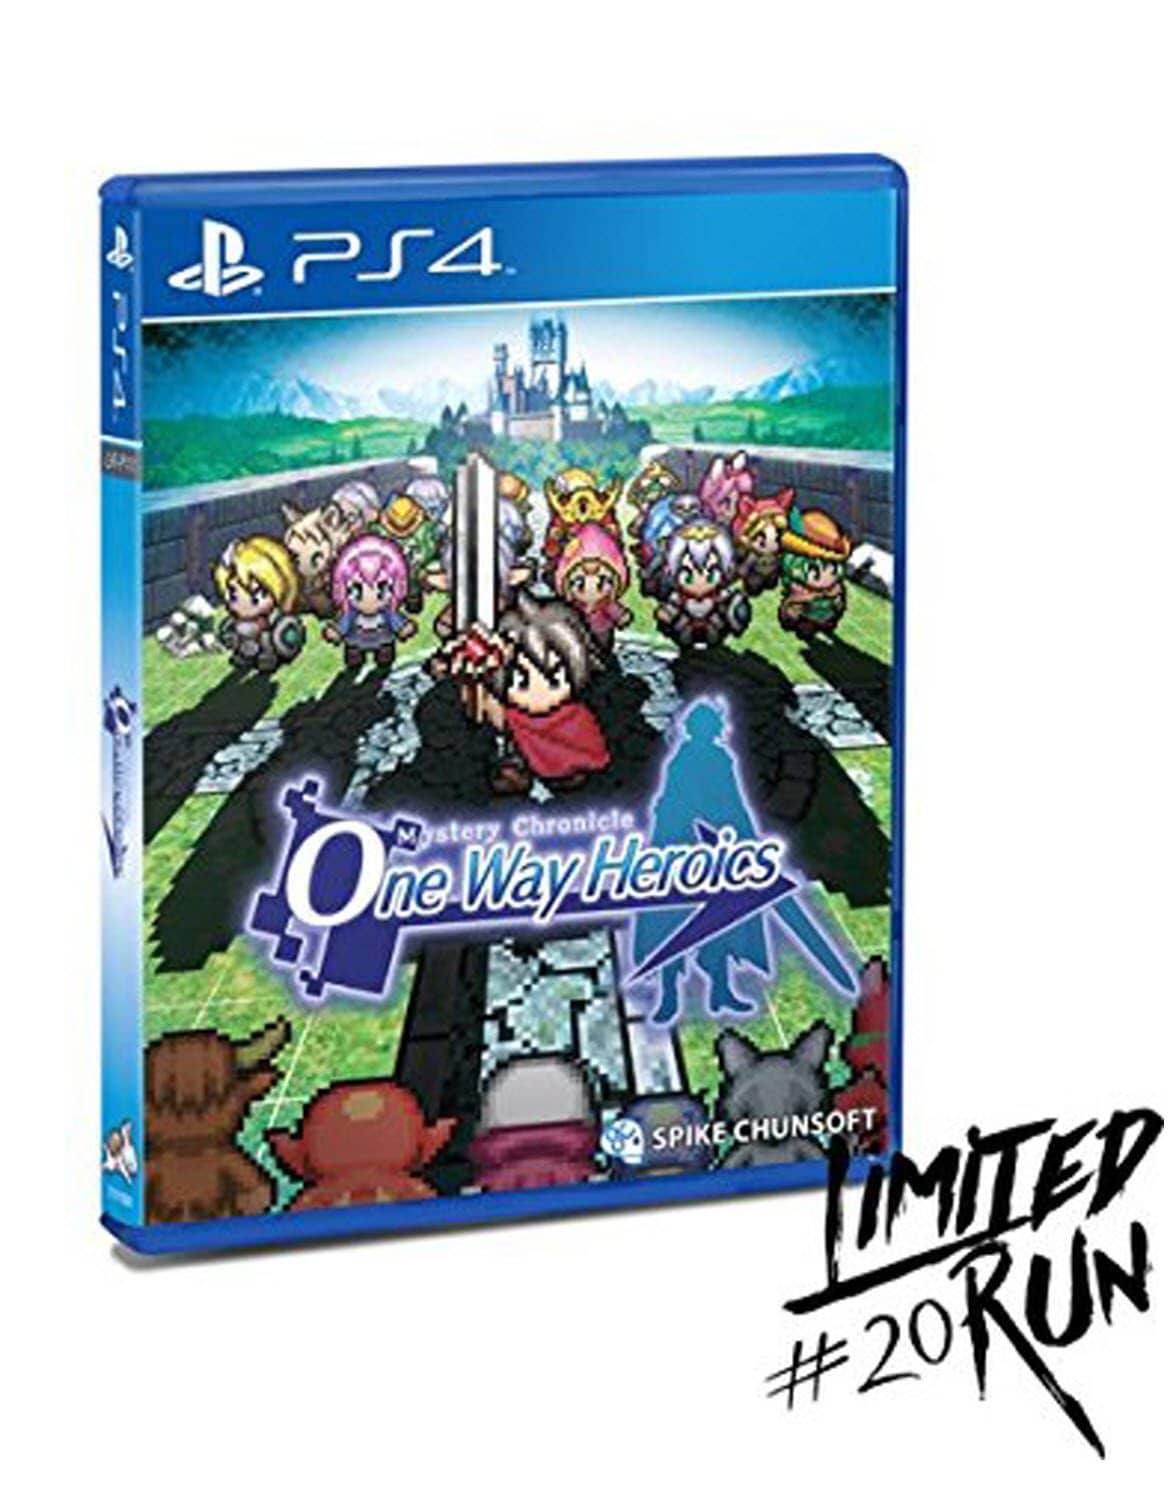 Mystery Chronicle One Way Heroics PlayStation 4 - Limited Run Games #20